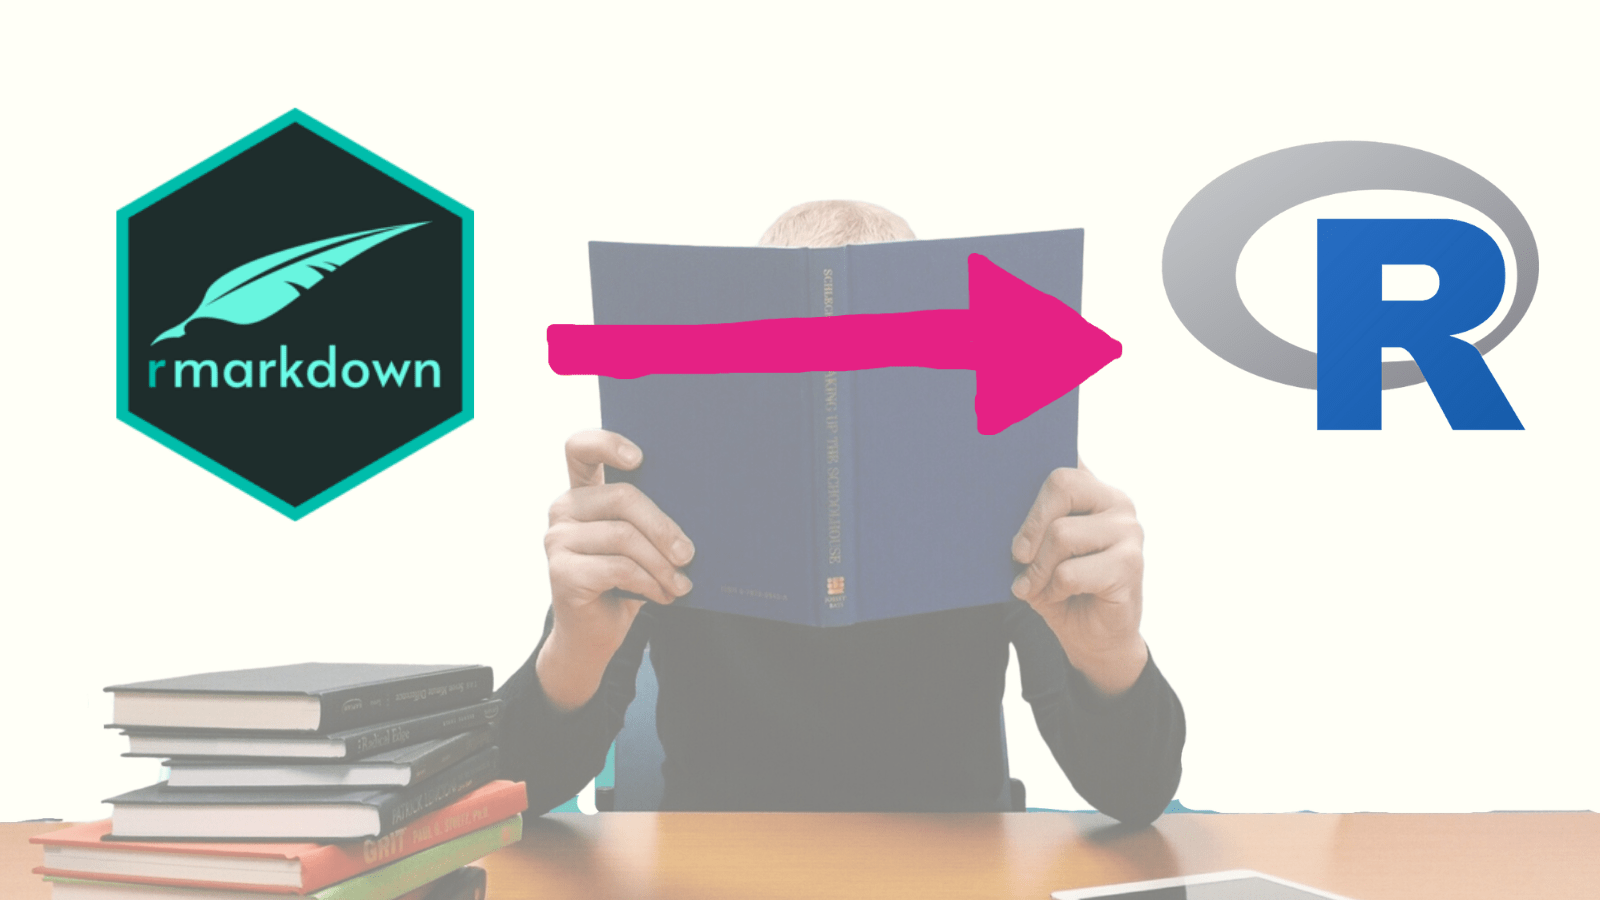 Left side shows the R Markdown logo with an arrow to the right pointing to the R logo. Behind this there is a faded image of someone studying from a book that covers their face.